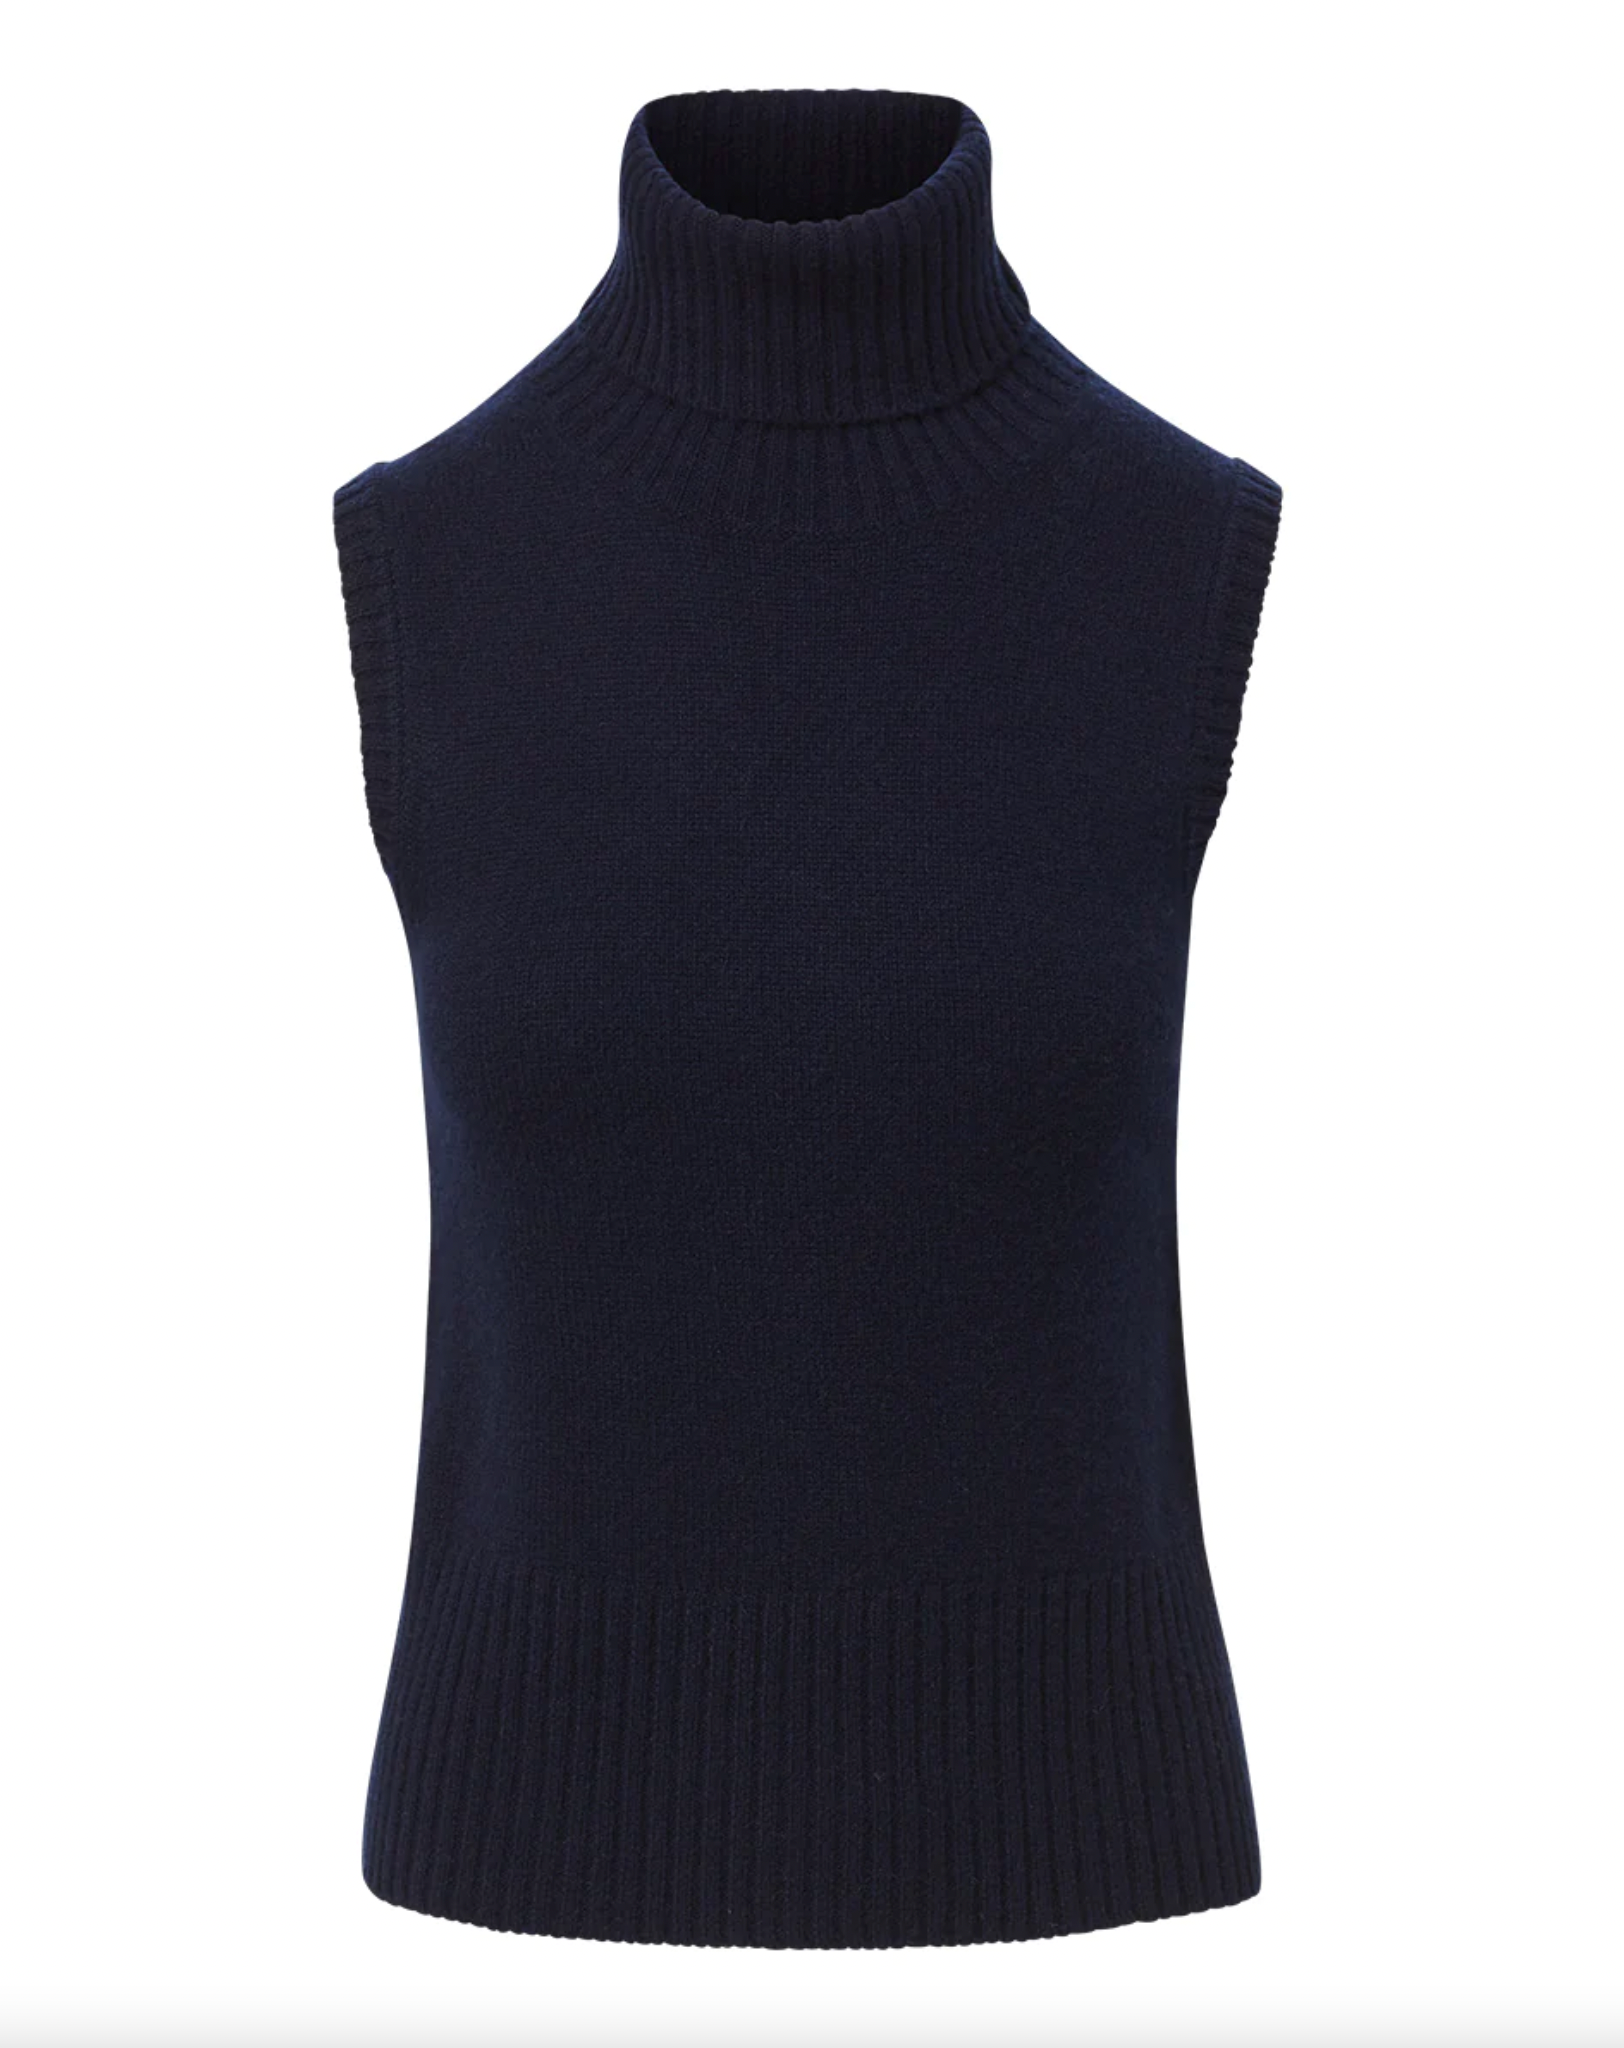 Mazzy Cashmere Shell-Navy